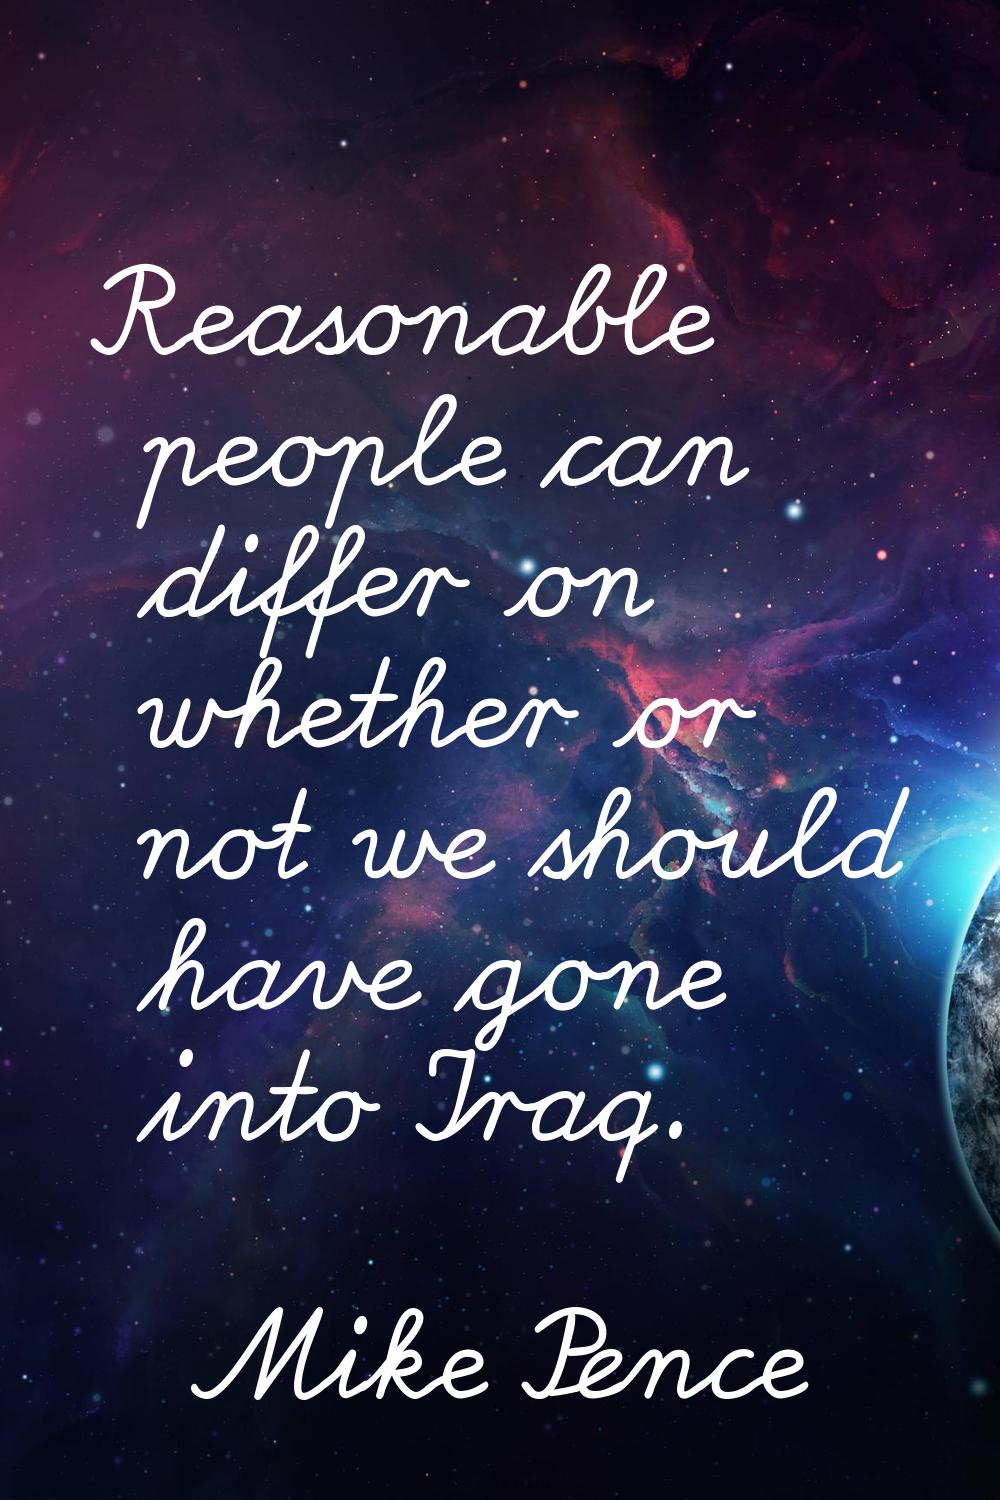 Reasonable people can differ on whether or not we should have gone into Iraq.